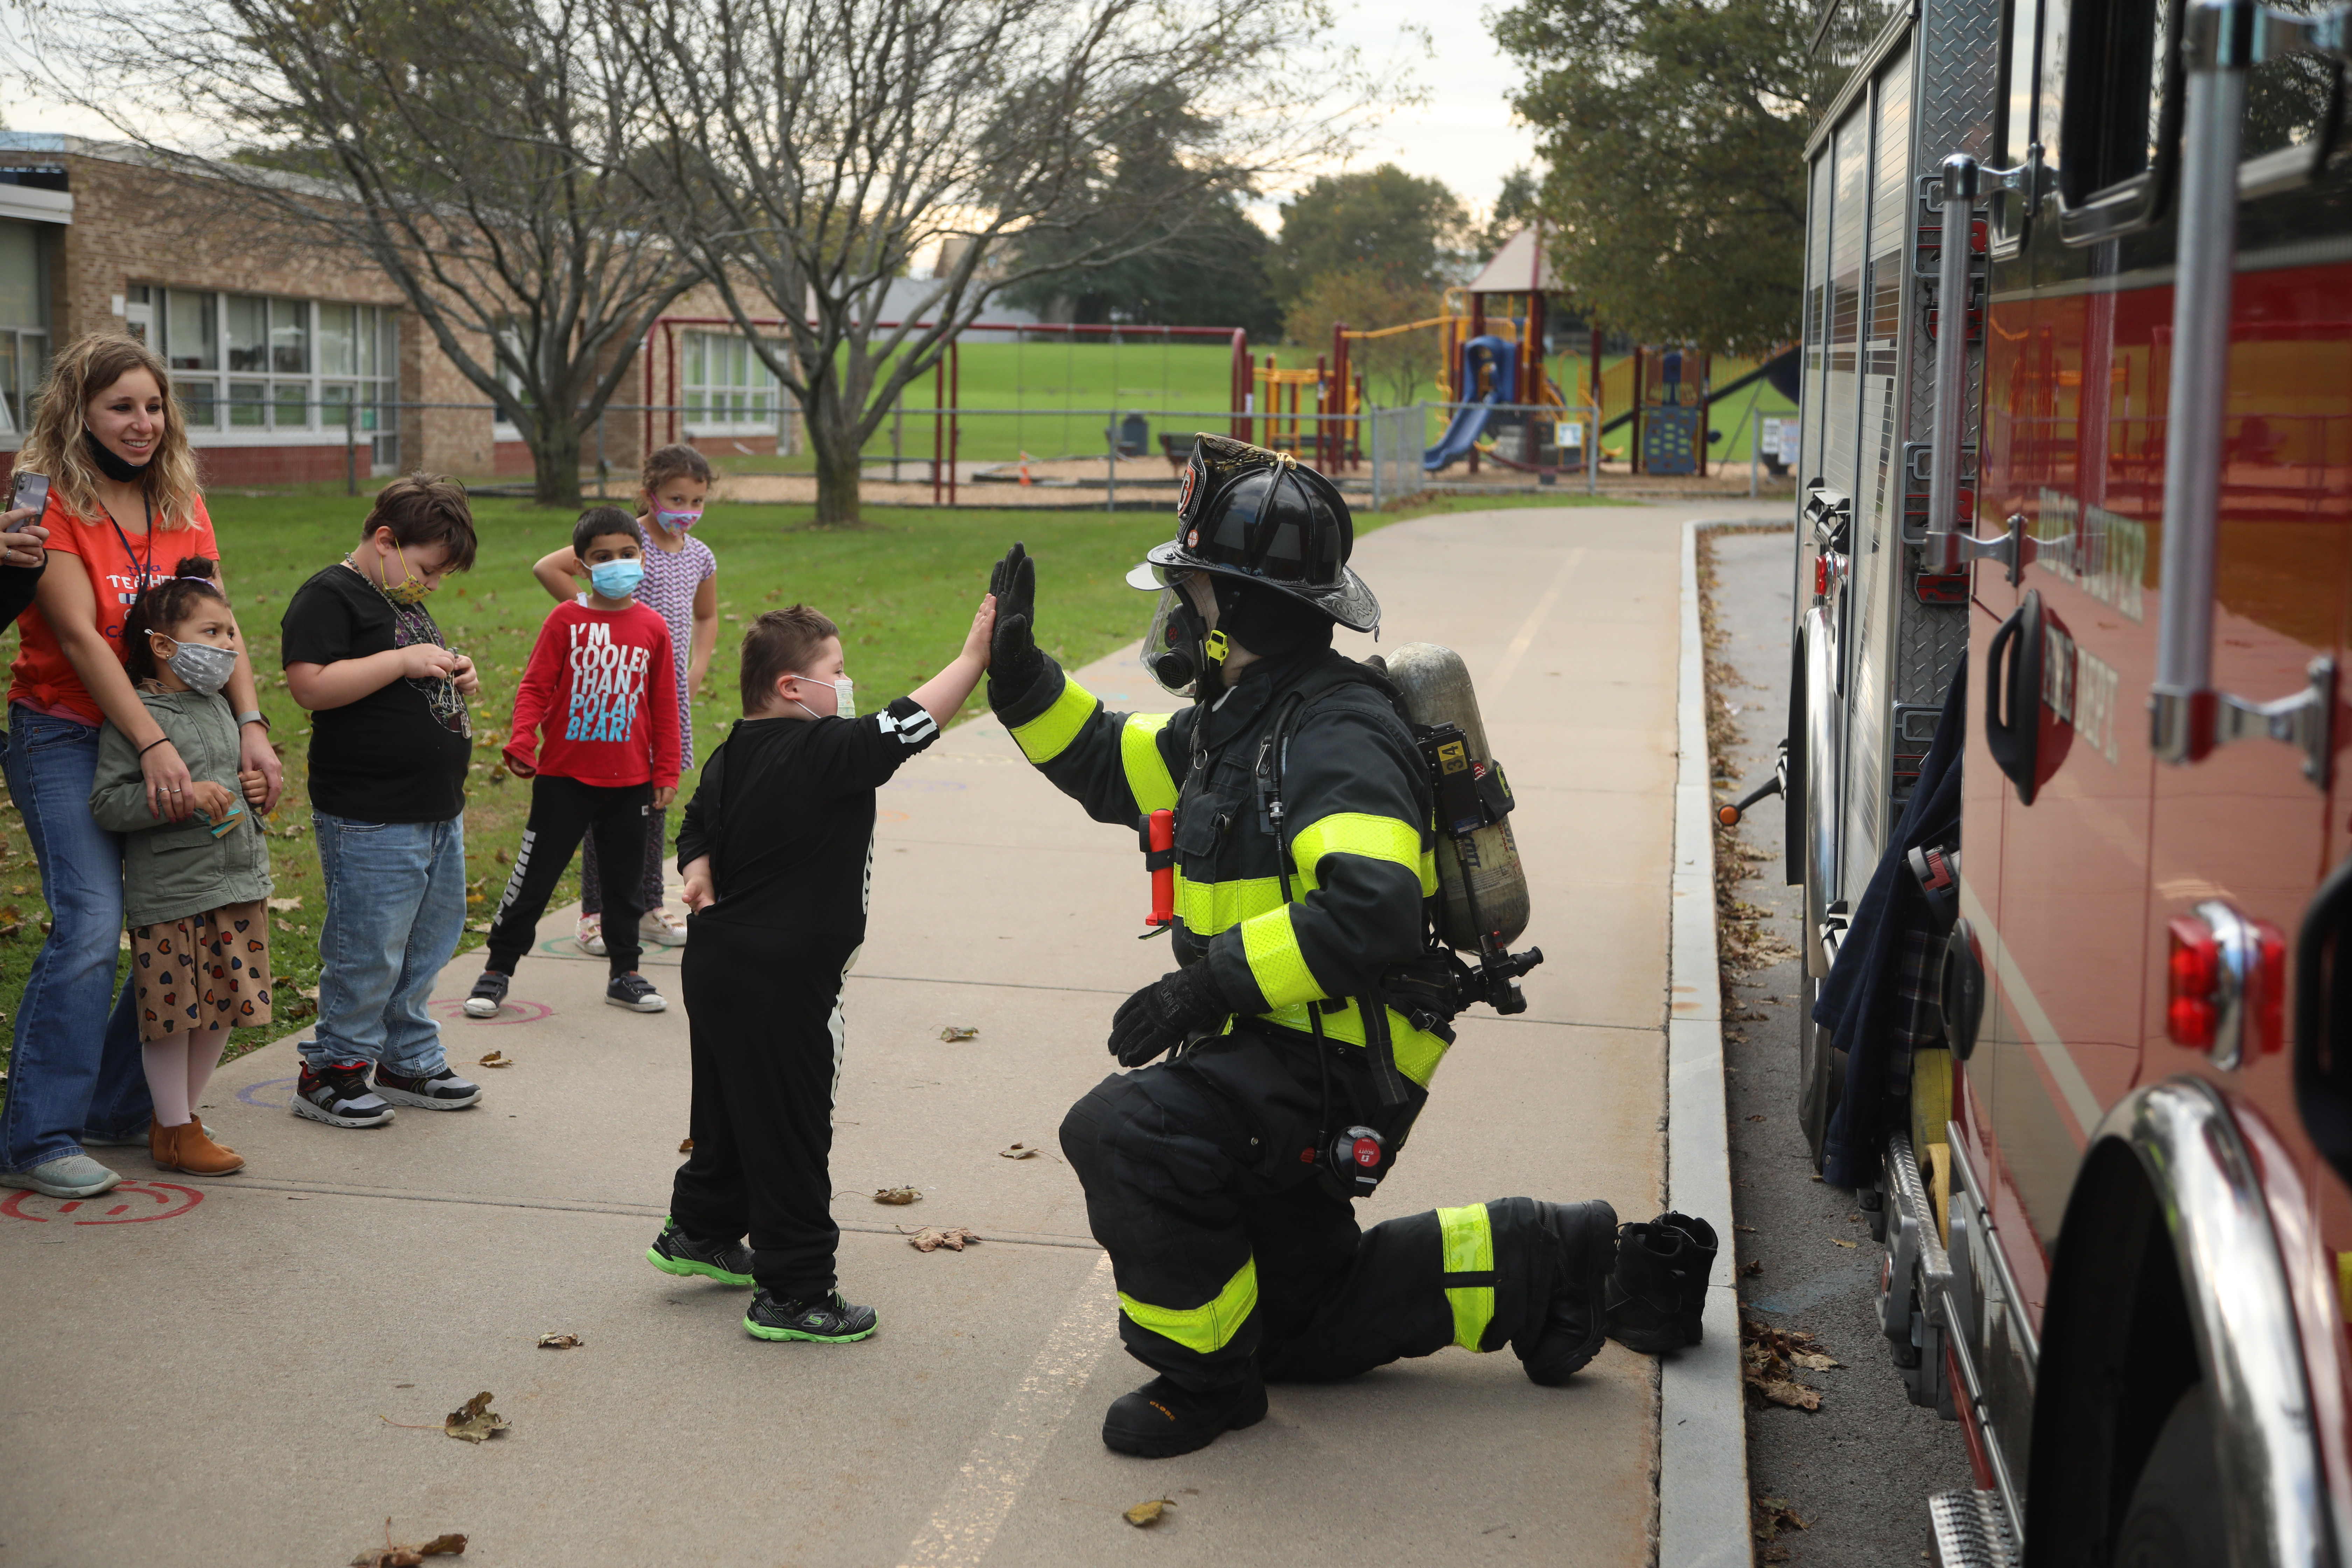 student high fiving a fire fighter